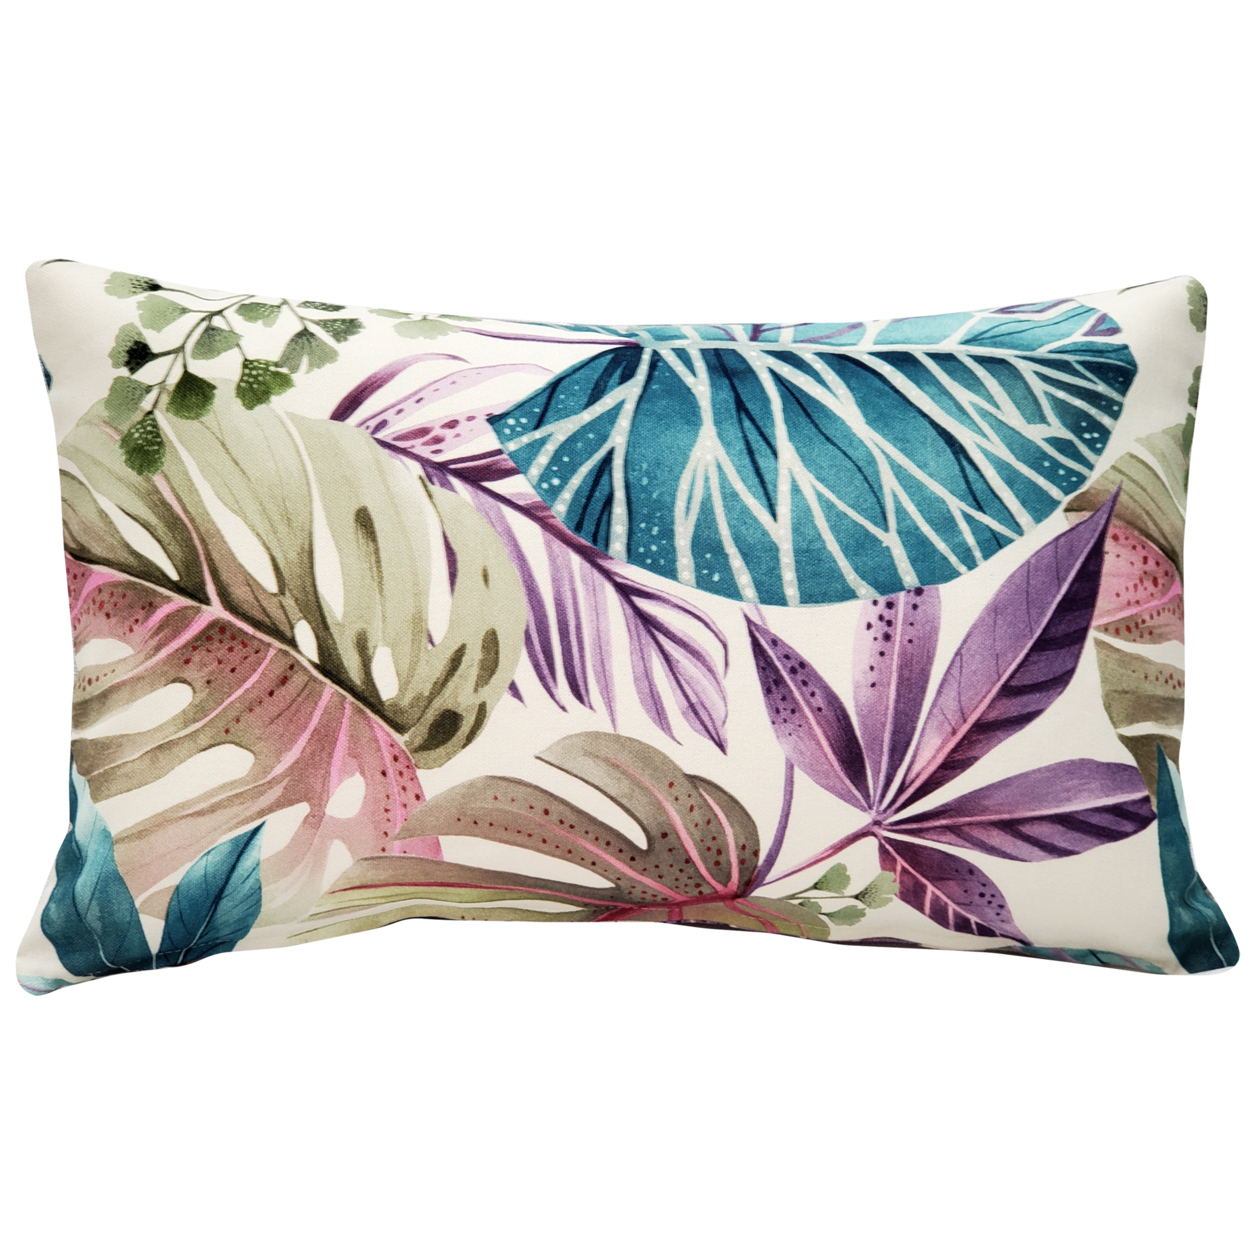 Thai Garden Blue Leaf Throw Pillow 12x20 Inches Square, Complete Pillow With Polyfill Pillow Insert